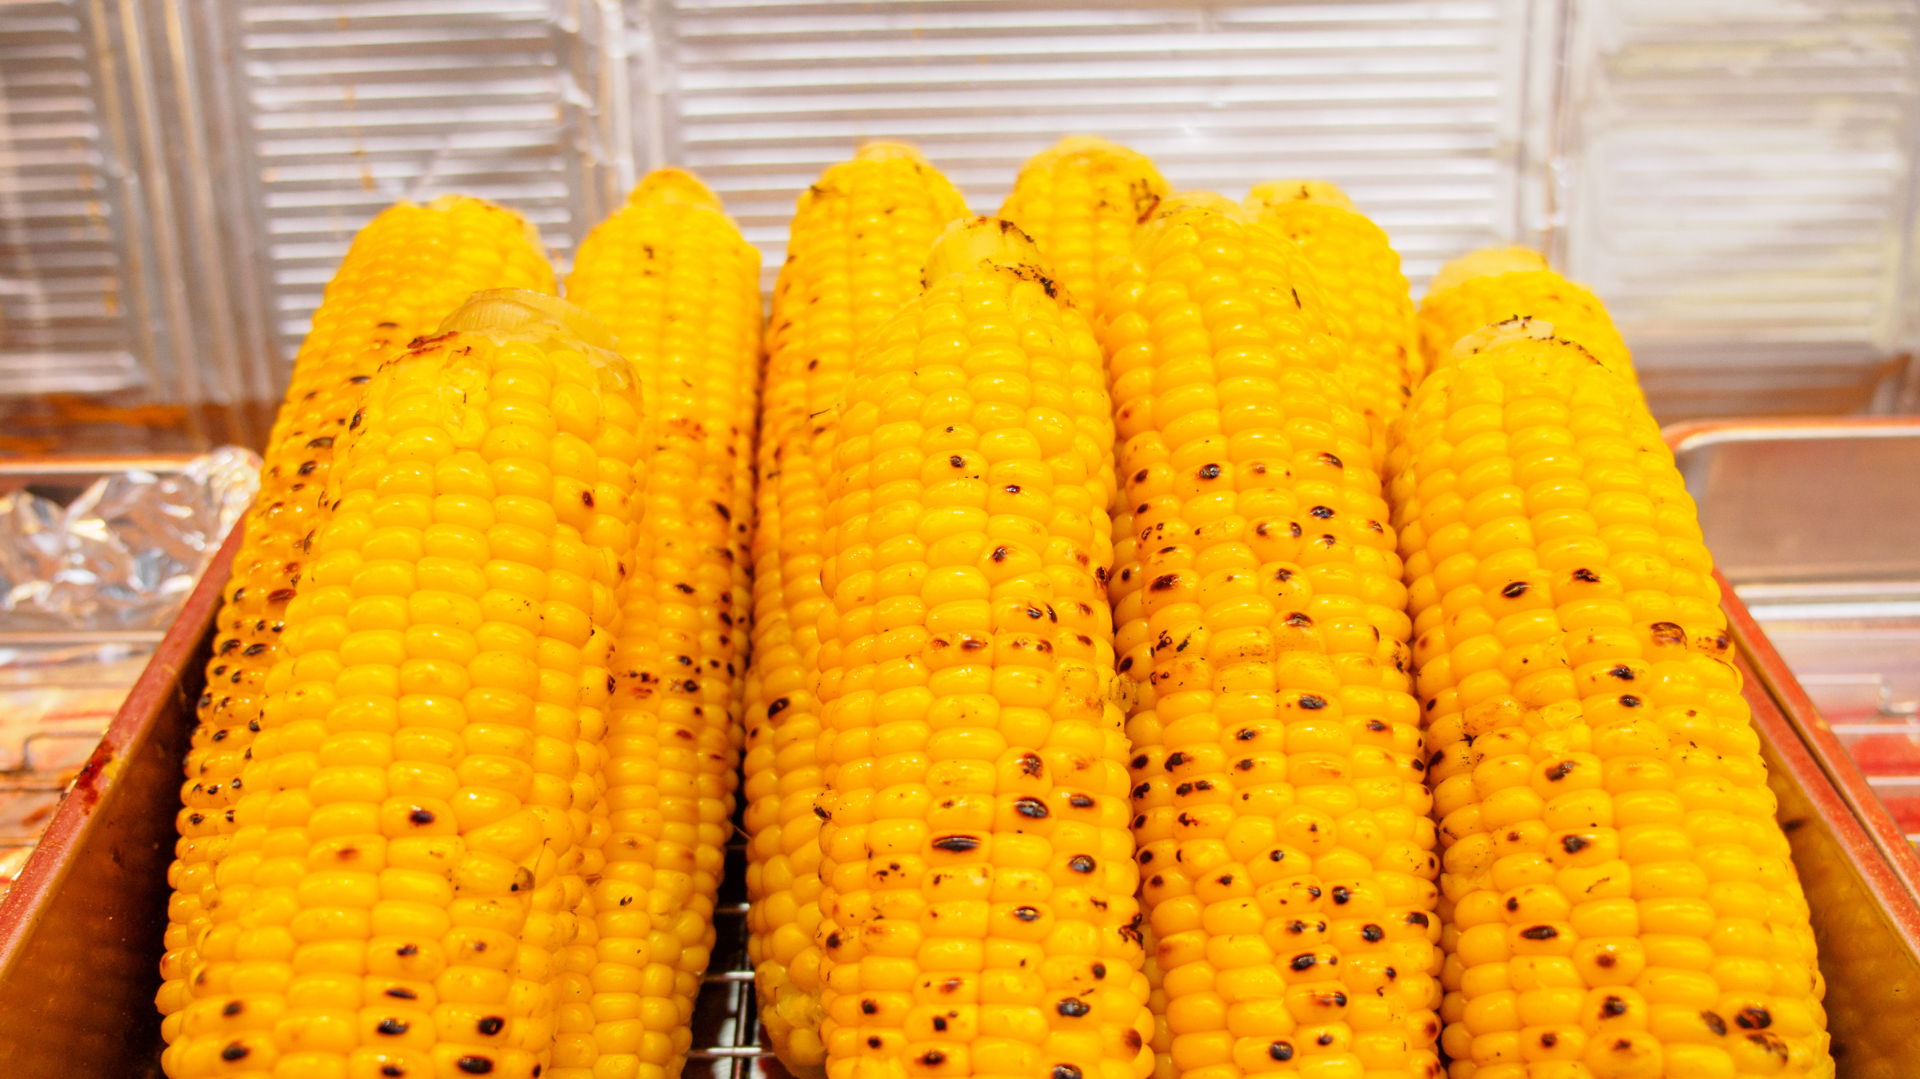 Roasting Corn on the Grill